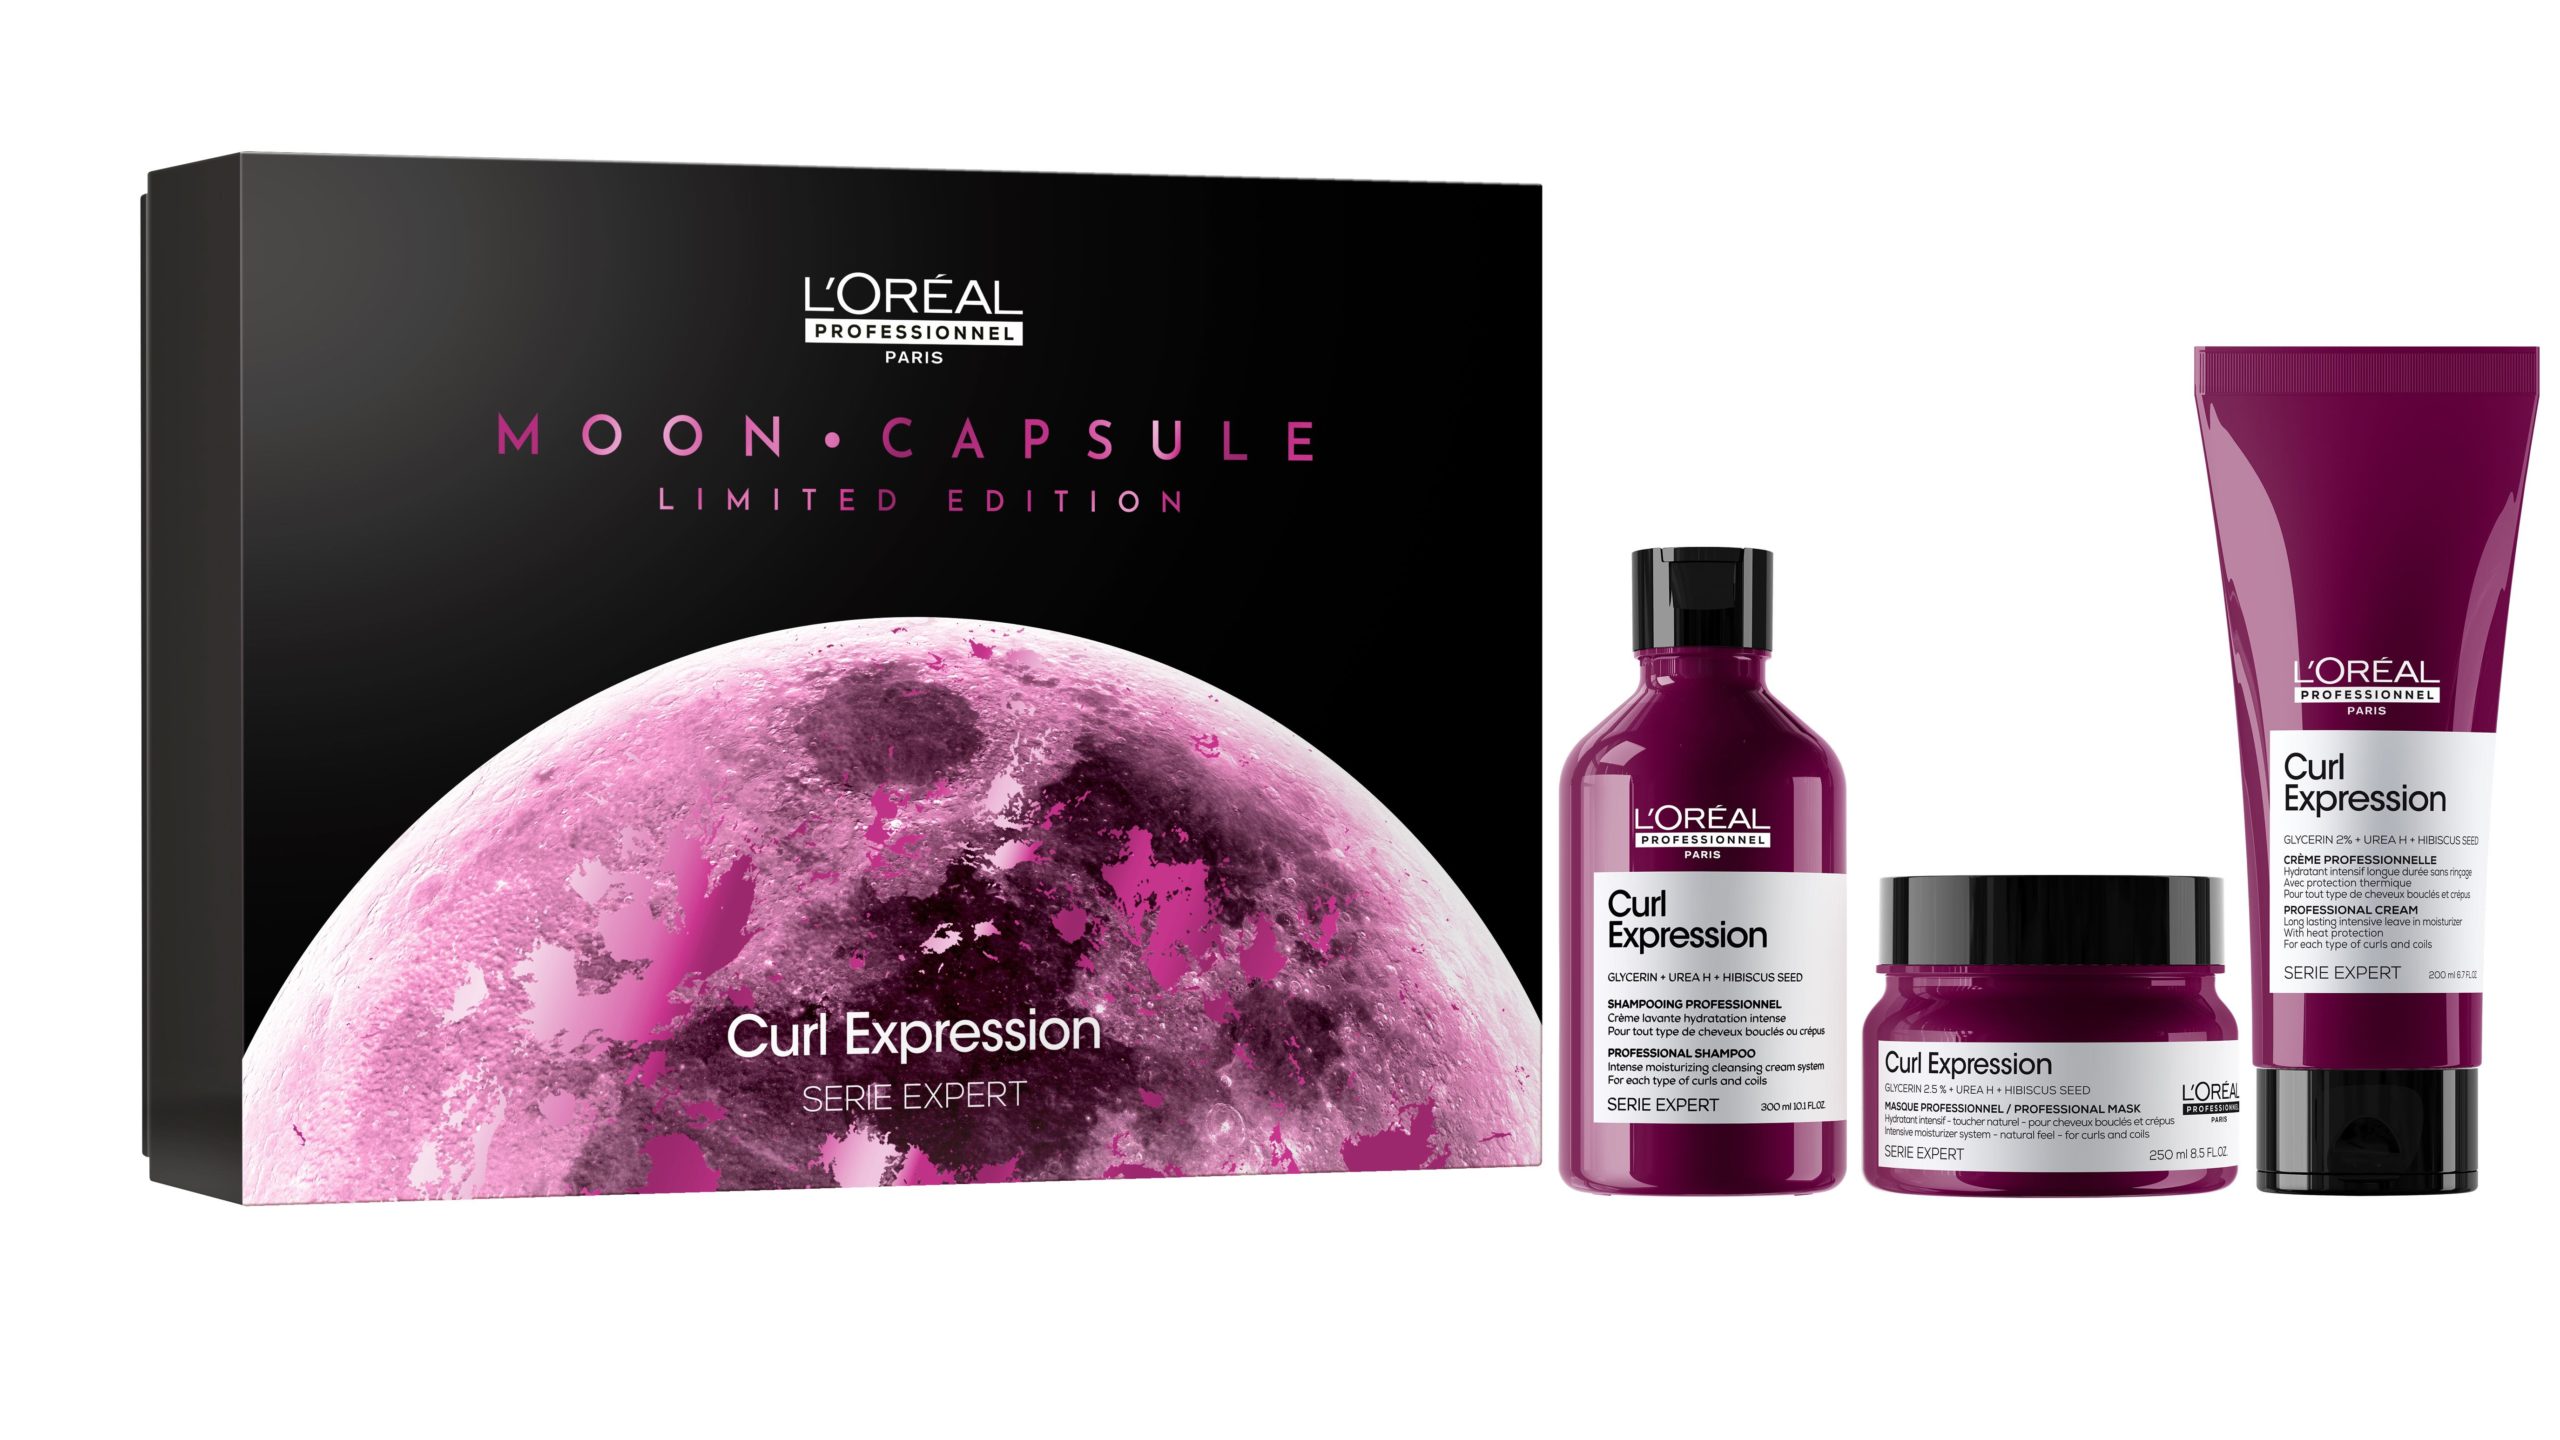 Gift-giving with L'Oréal Professionnel